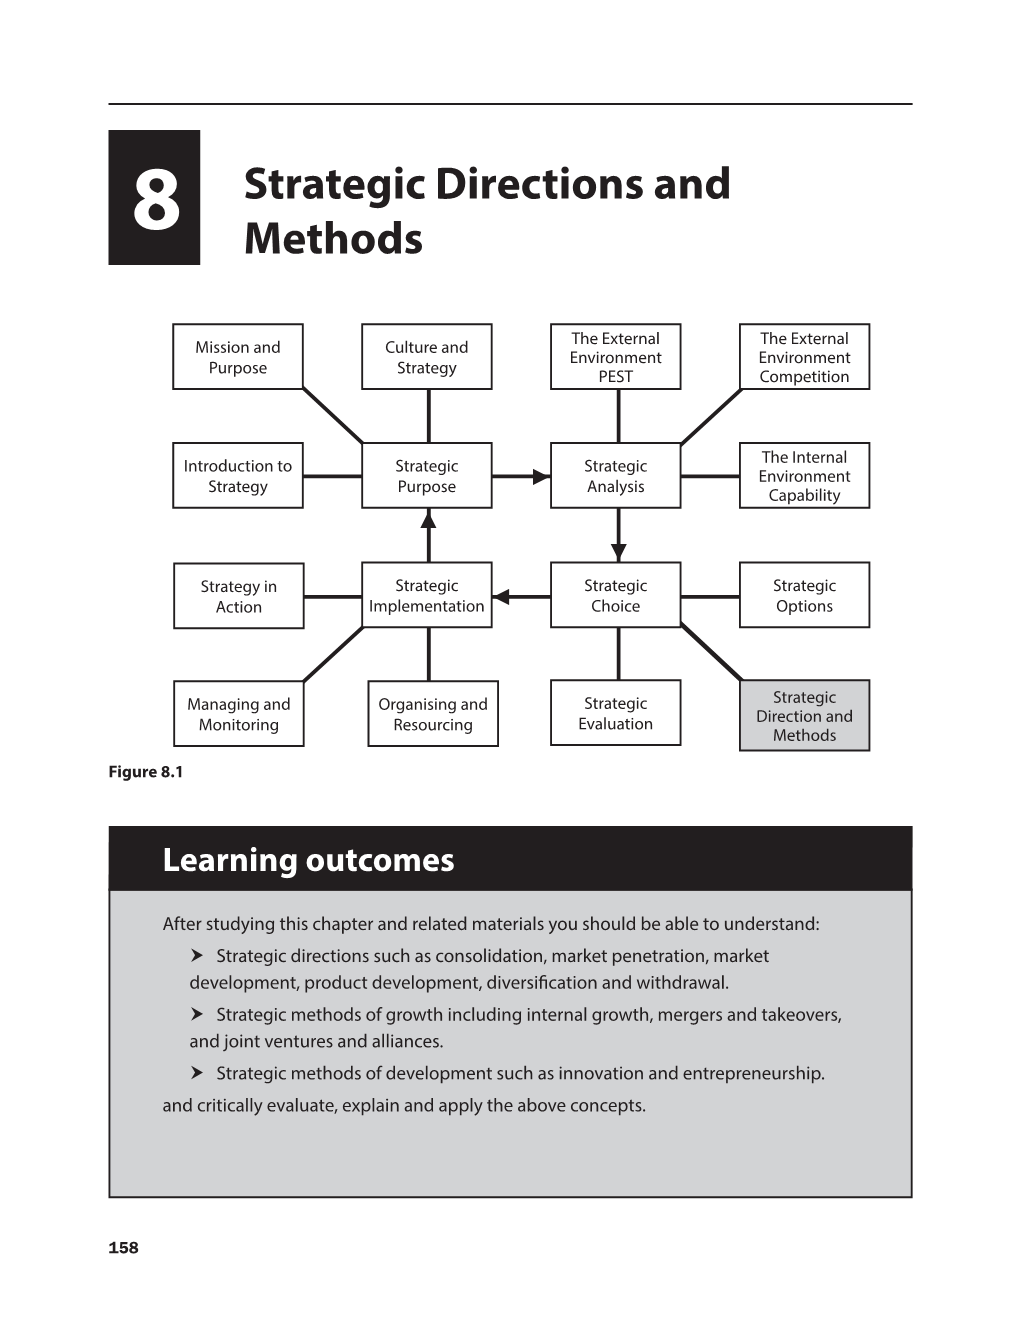 8 Strategic Directions and Methods